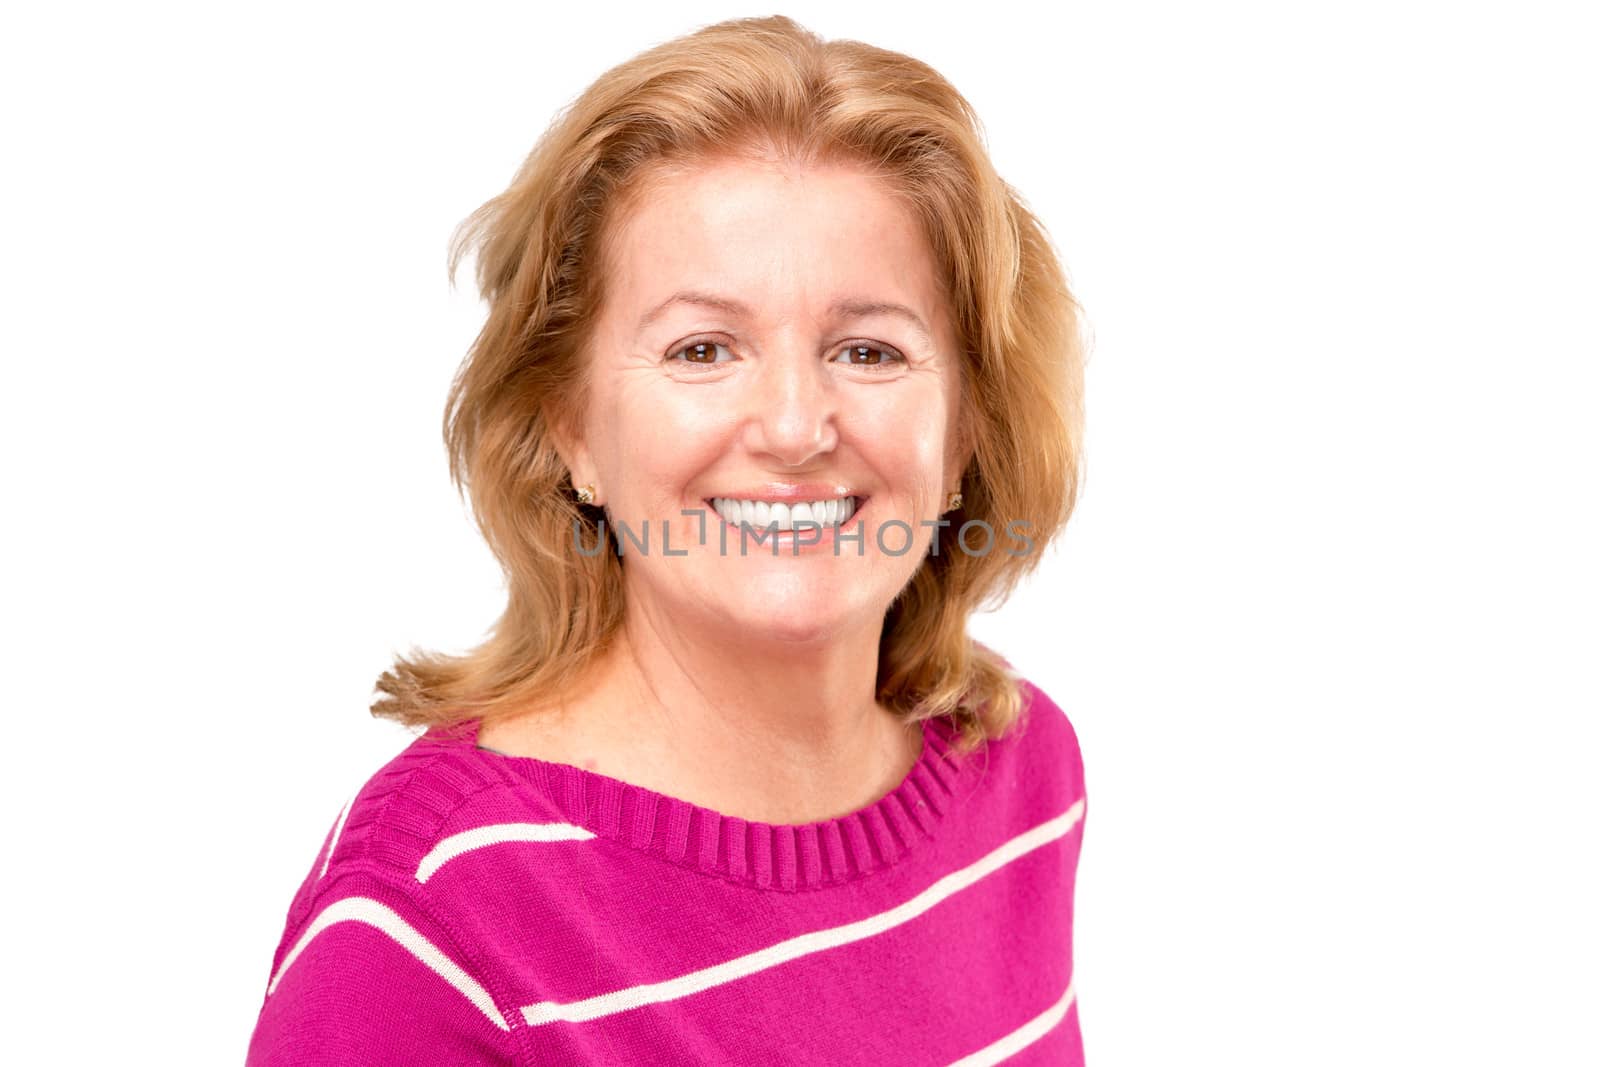 A blonde lady with pink sweater and greate great smile on her face perhaps feels good.